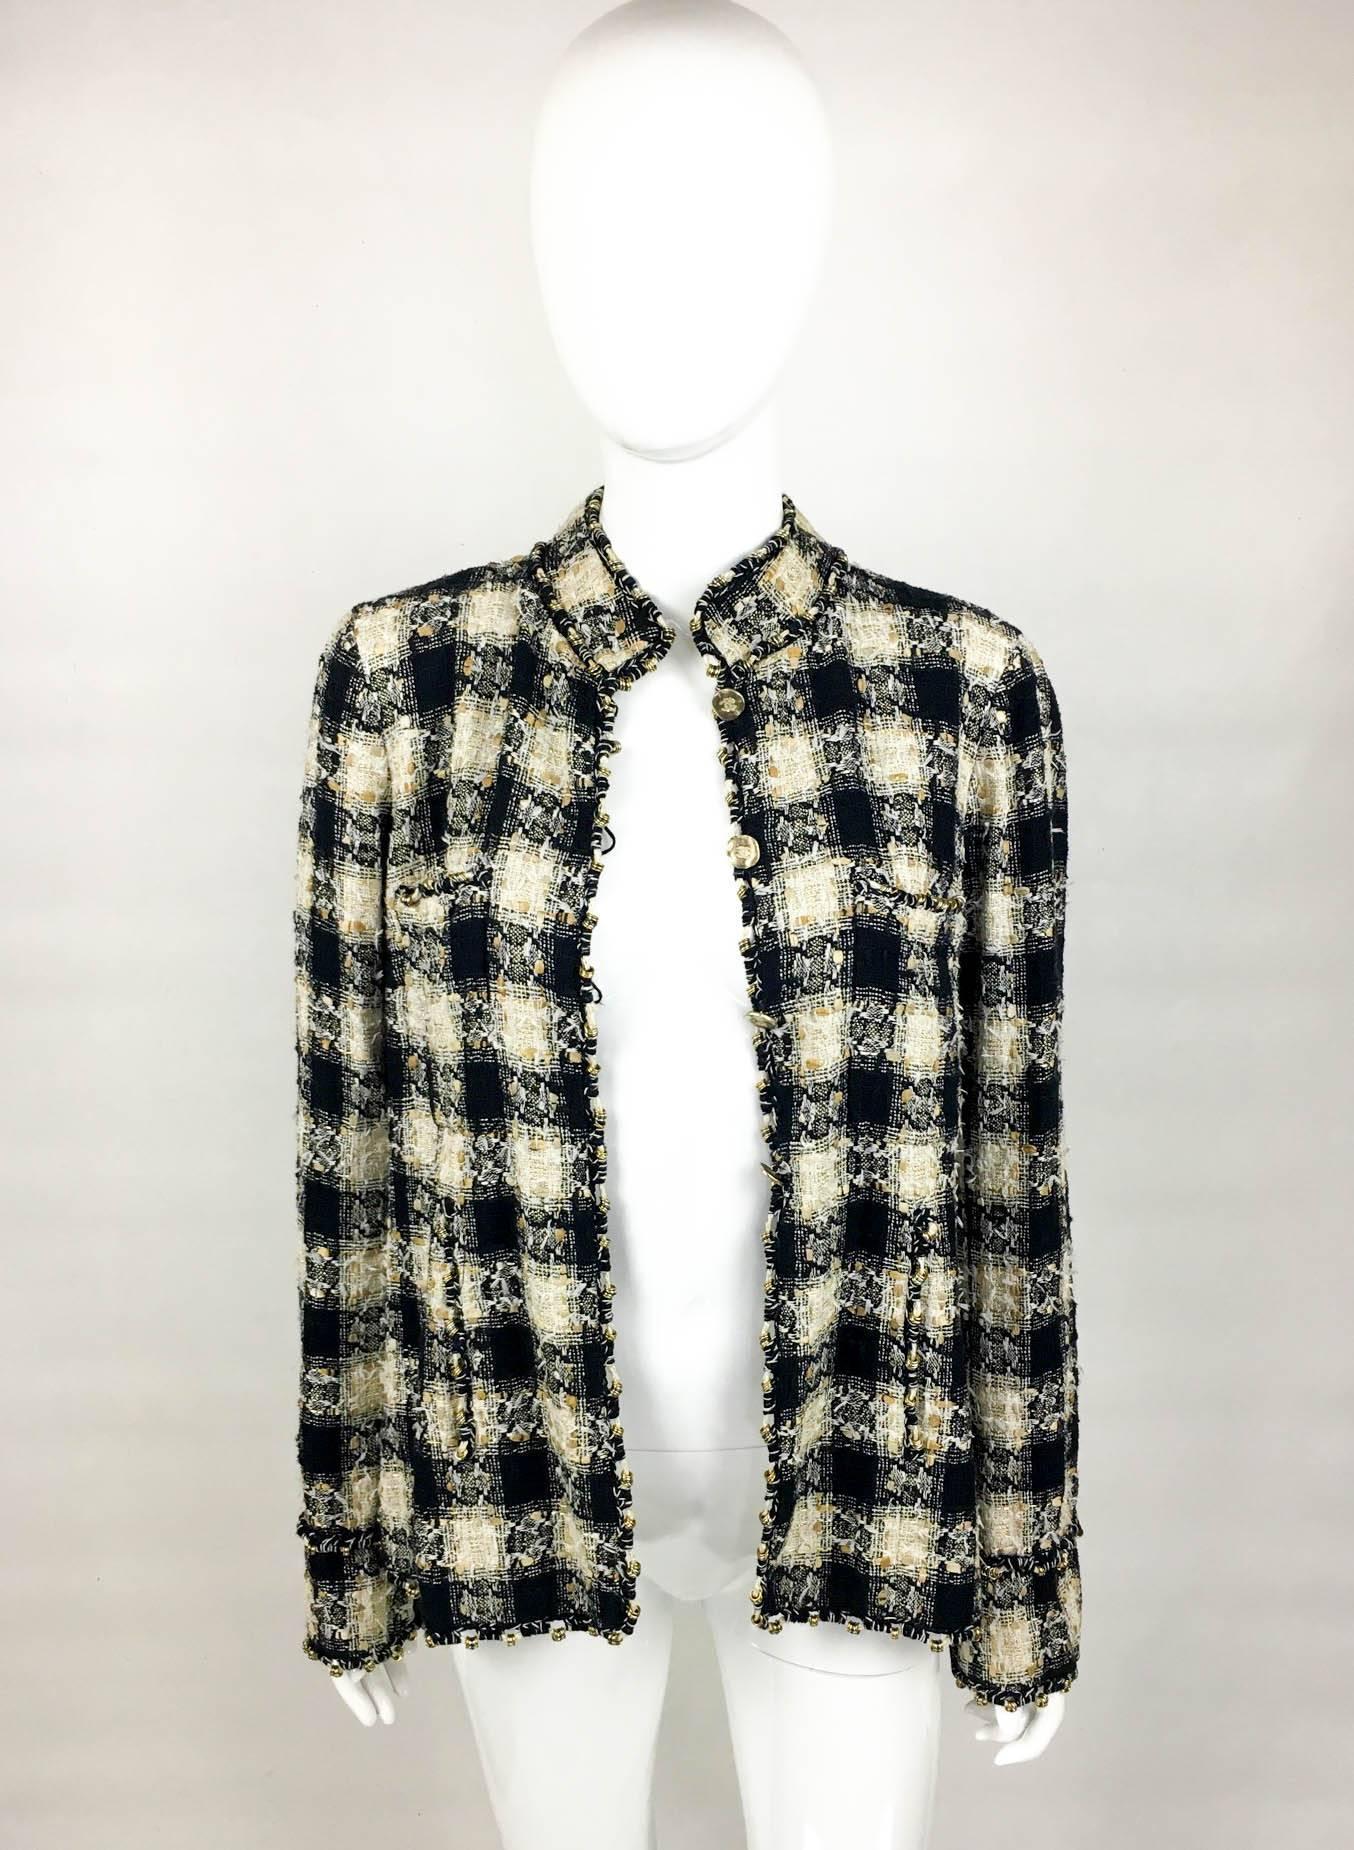 Chanel Bouclé Jacket in Gold, Black and Ivory with Embellished Trims - 2006 In Excellent Condition In London, Chelsea